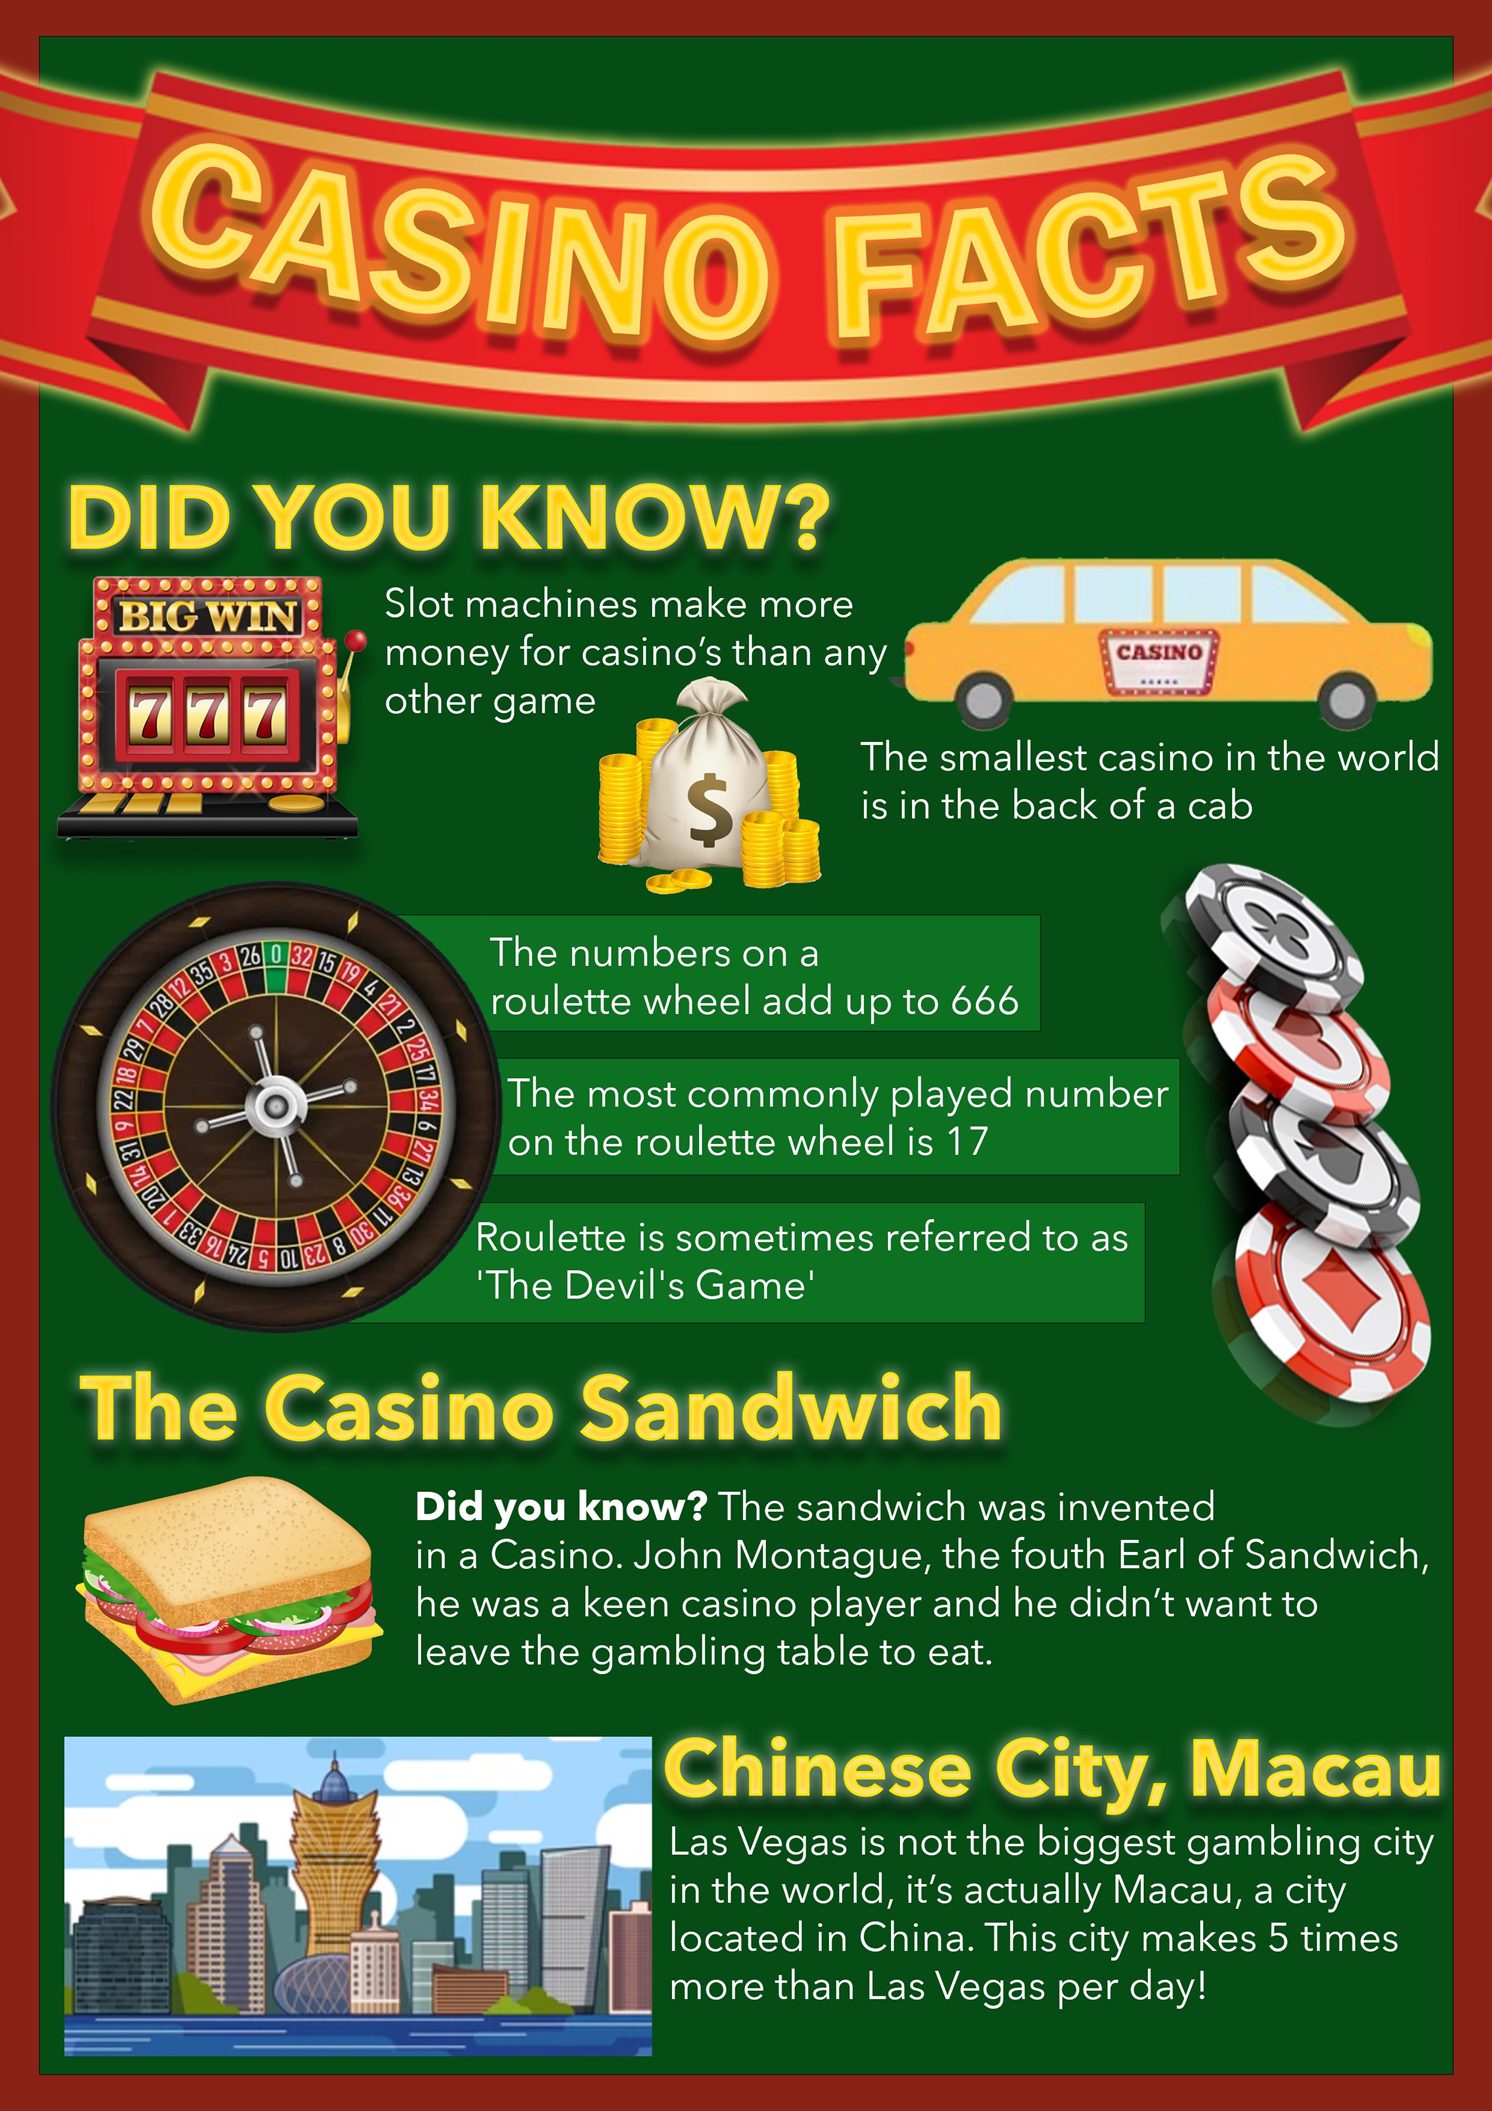 Casino Gambling Facts & Statistics you most likely don’t know!